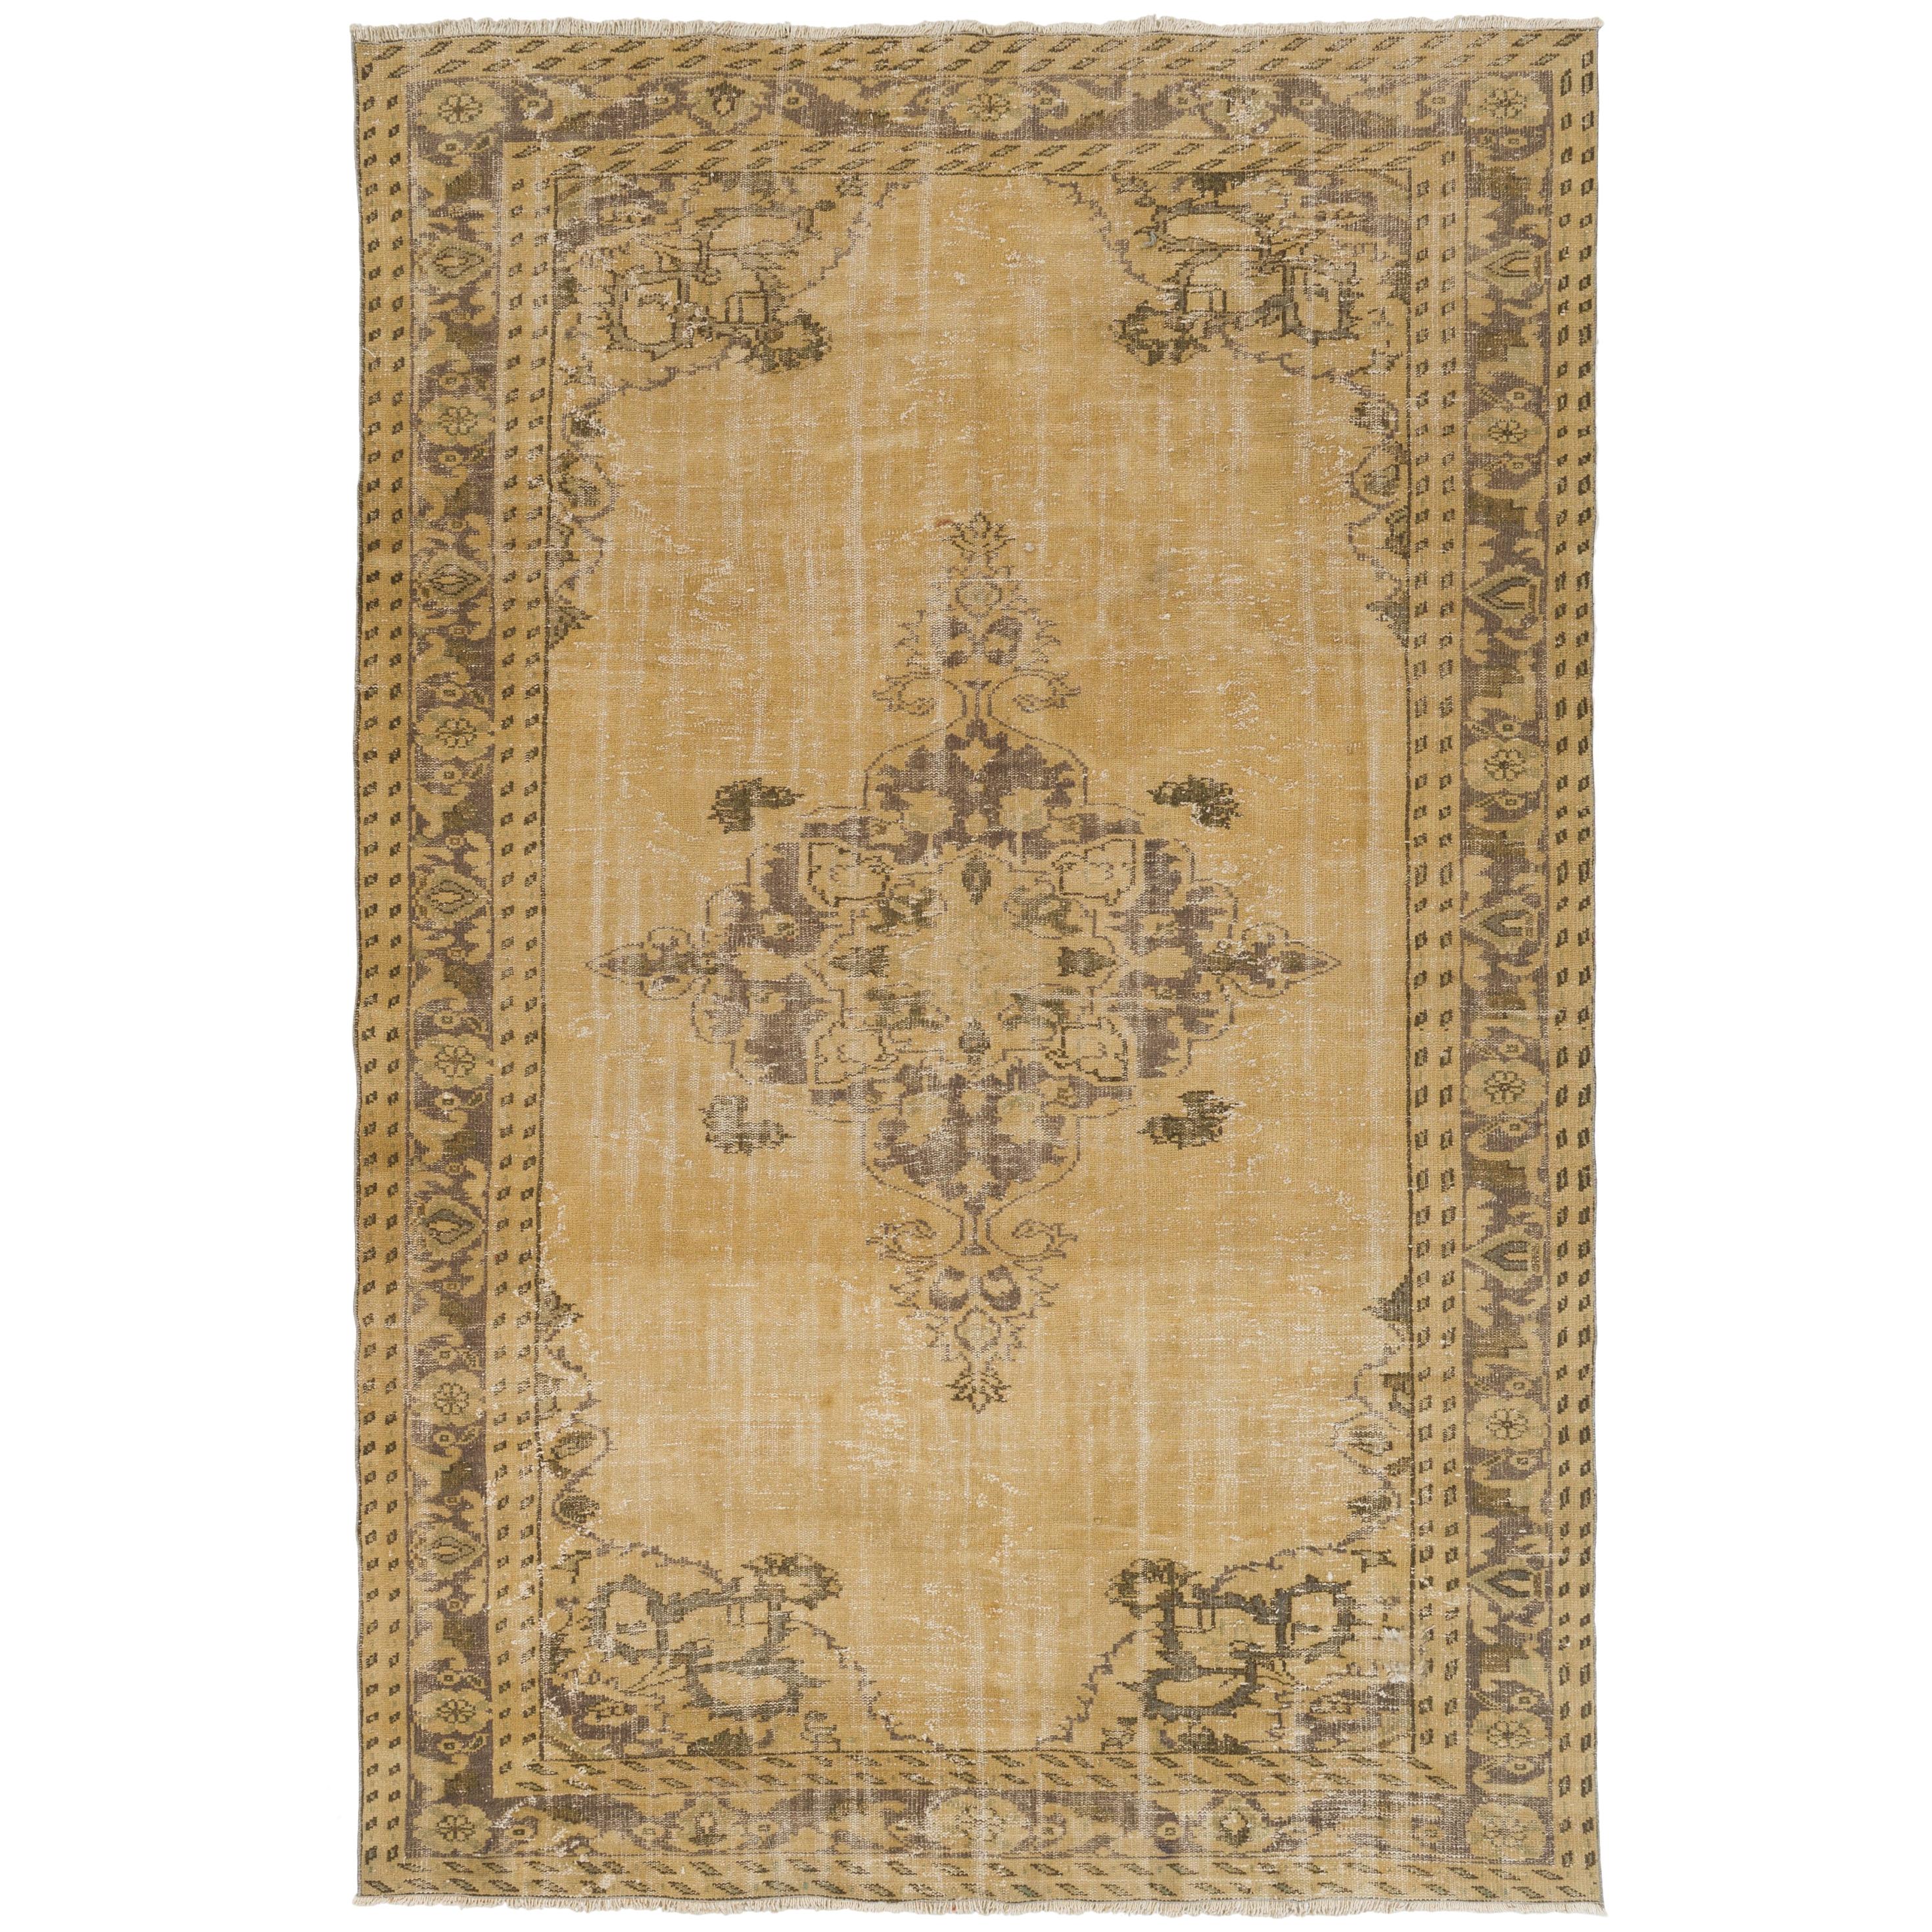 7.3x10.7 Ft One of a Kind Vintage Hand Knotted Oushak Rug in Soft Colors.